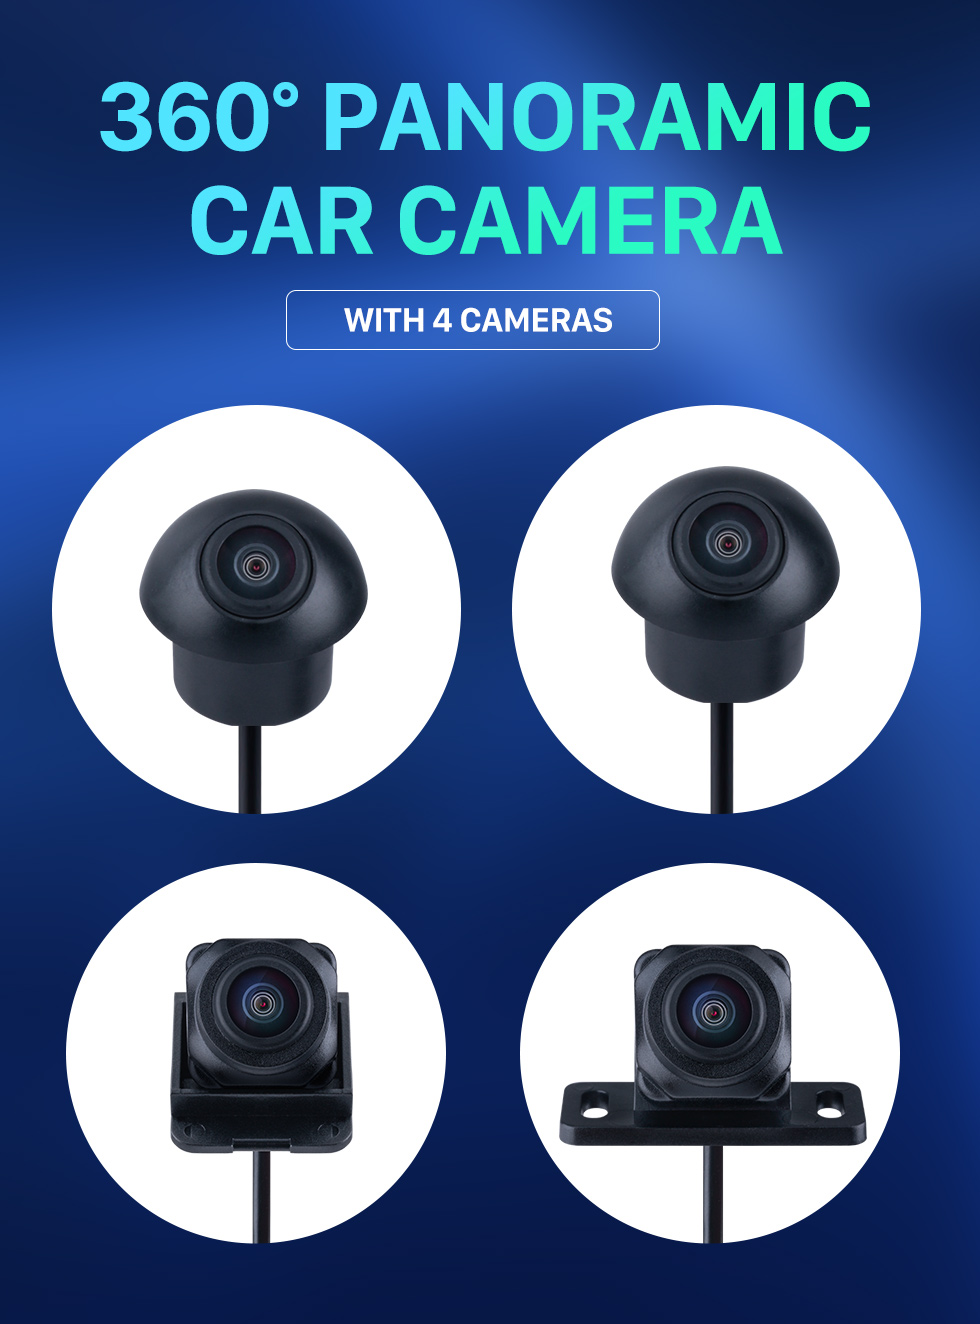 Seicane Universal 360° Surround View Car camera 360 degree Panoramic front rear left right cameras With Waterproof Night Vision